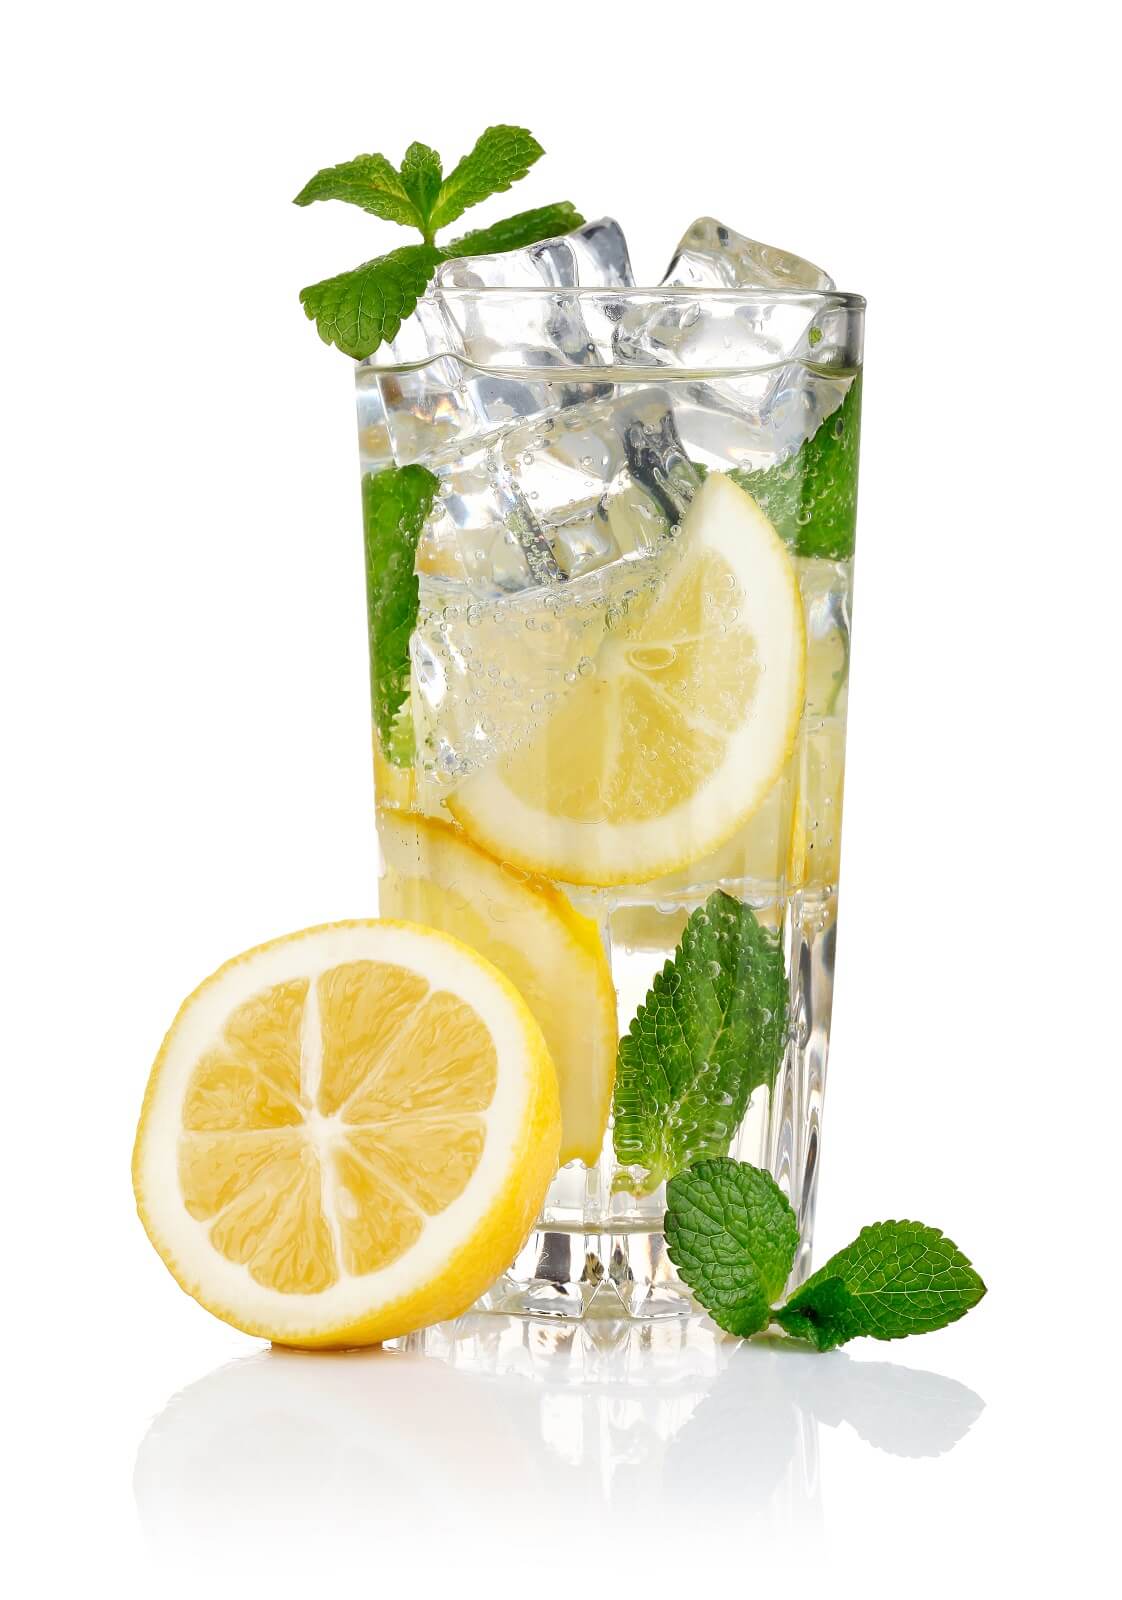 A glass of water with slices of lemon in it to make it lemon water; and a sliced lemon on the side.